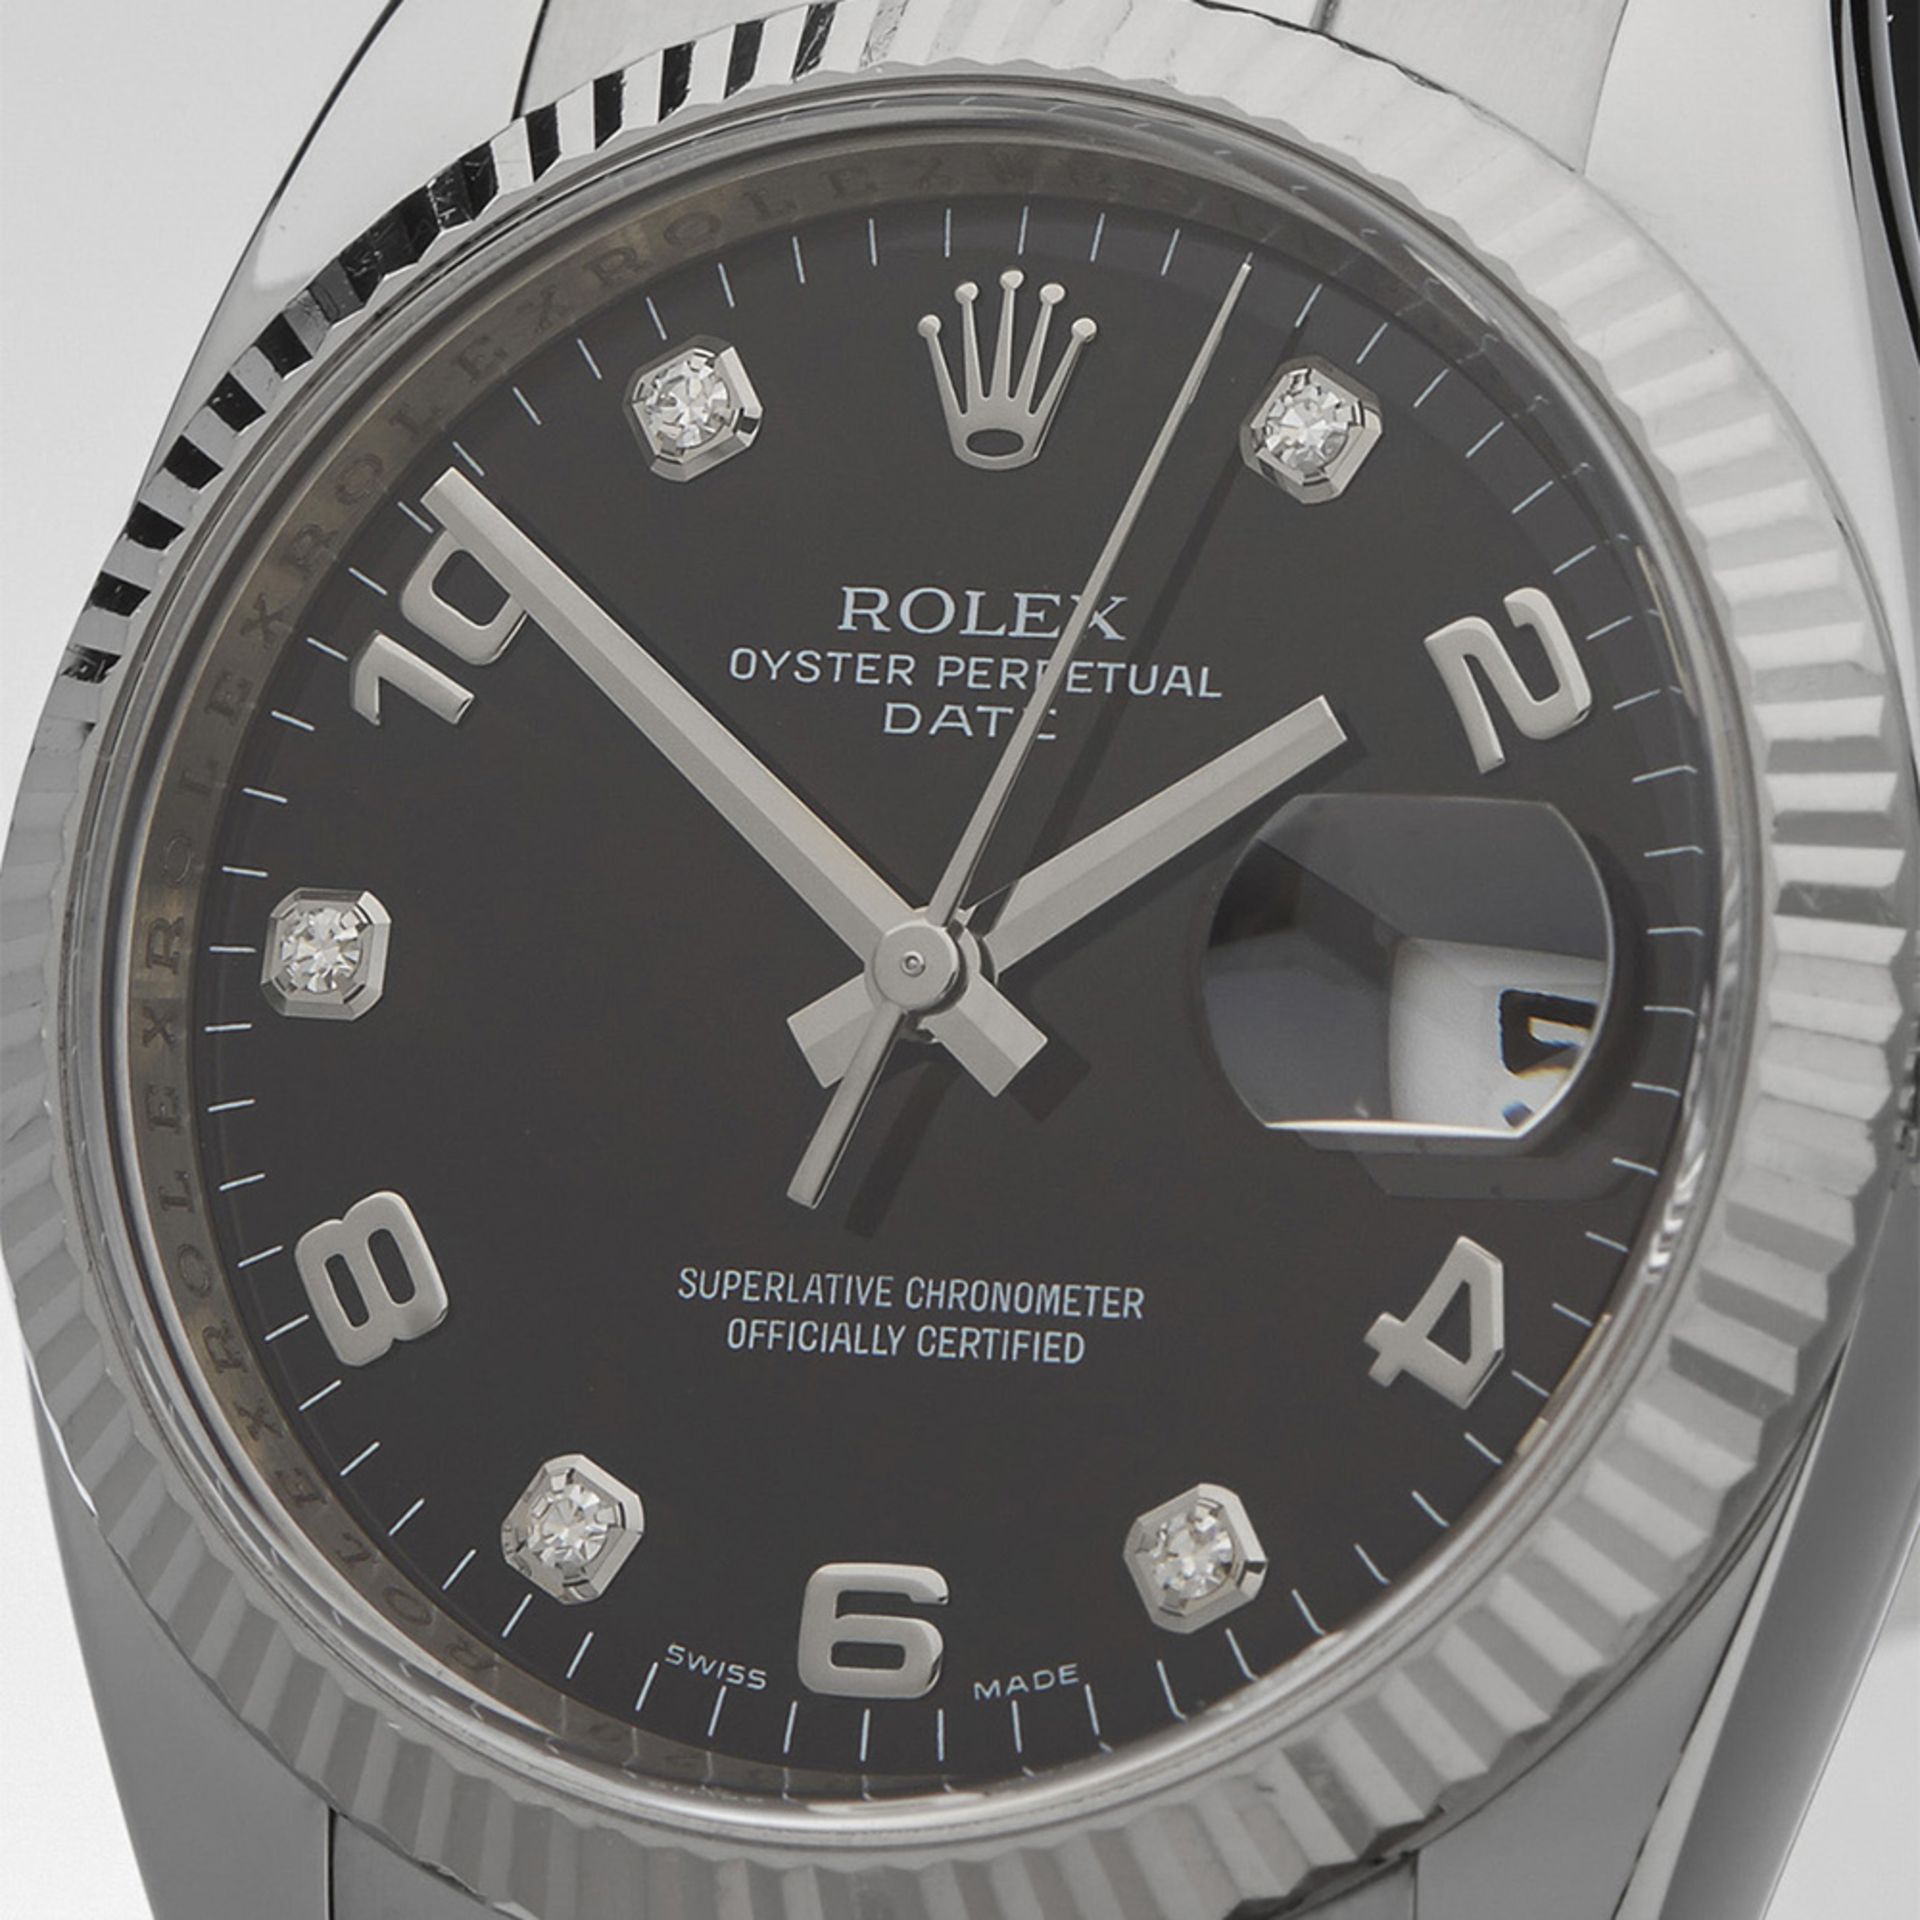 Oyster Perpetual Date 34mm Stainless Steel - 115234 - Image 3 of 9